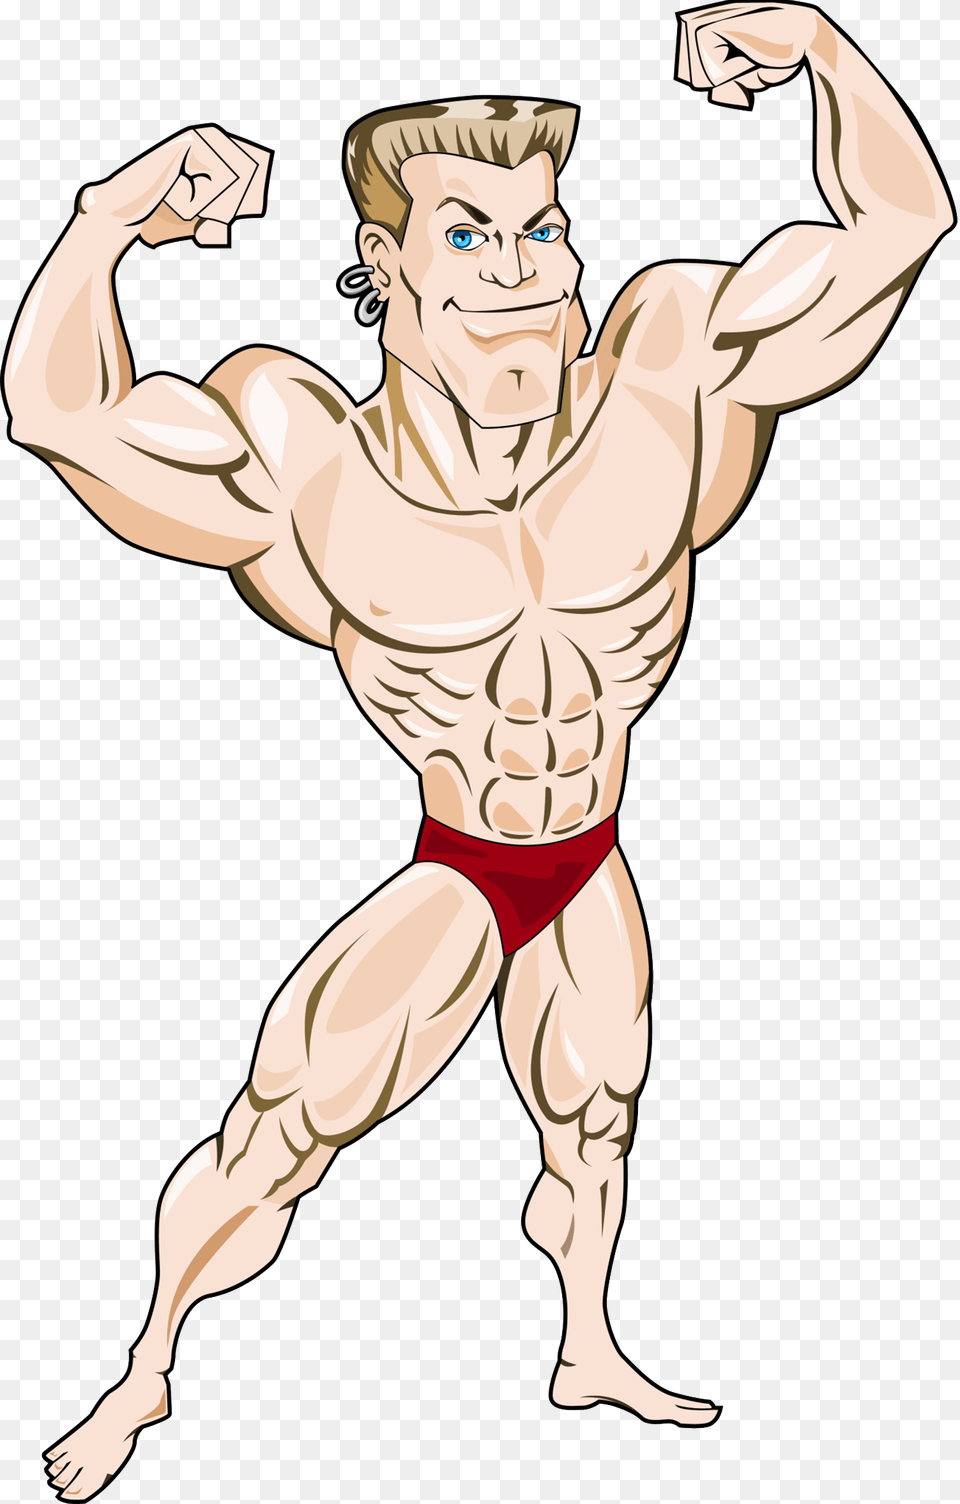 Muscle Tissue Bodybuilding Illustration Health And Mr Muscle, Person, Face, Head, Art Png